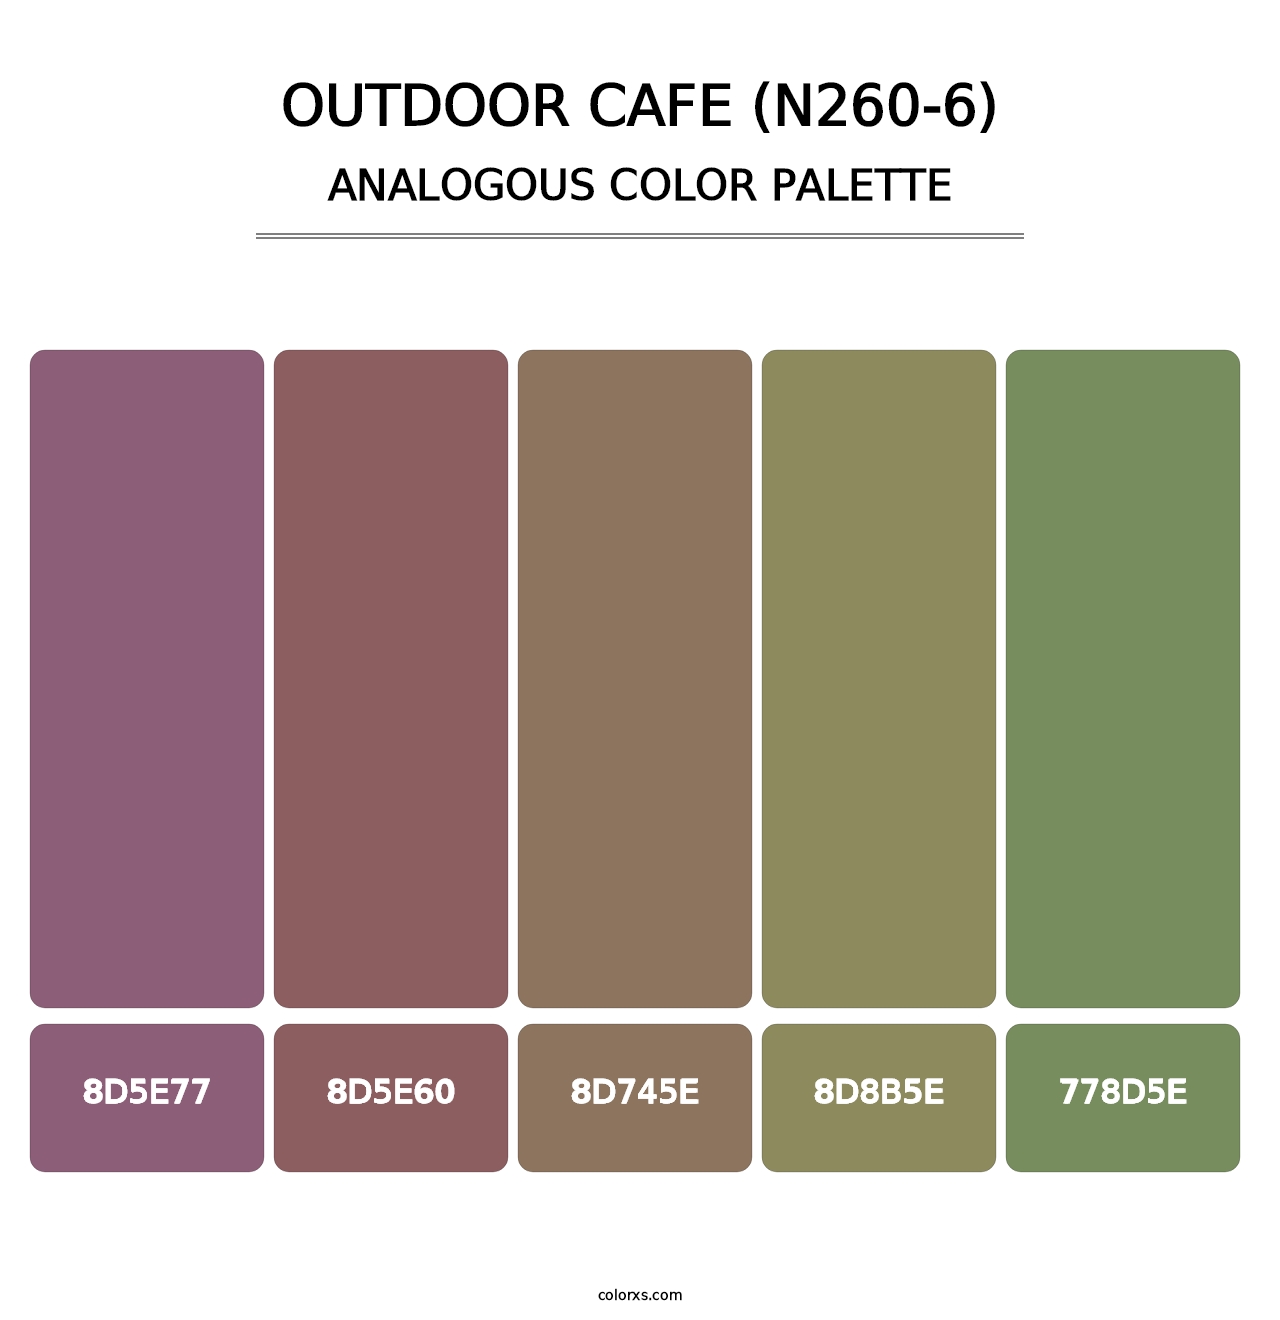 Outdoor Cafe (N260-6) - Analogous Color Palette